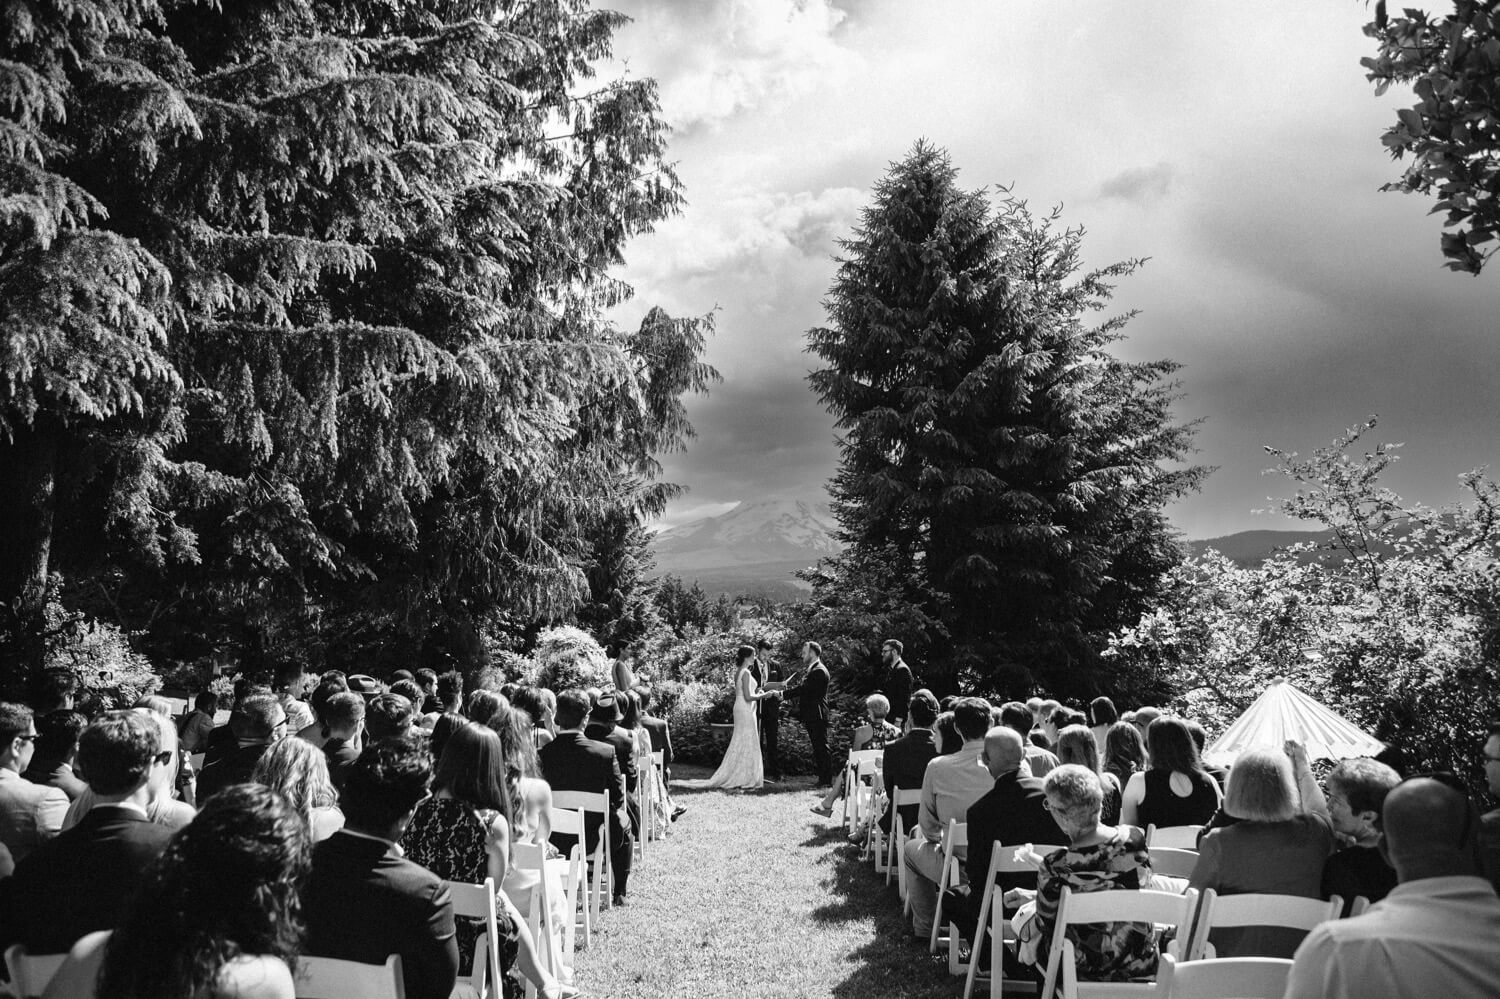 062_Mount Hood Organic Farms Wedding-Black and white photo of wedding ceremony in front of mount hood.jpg